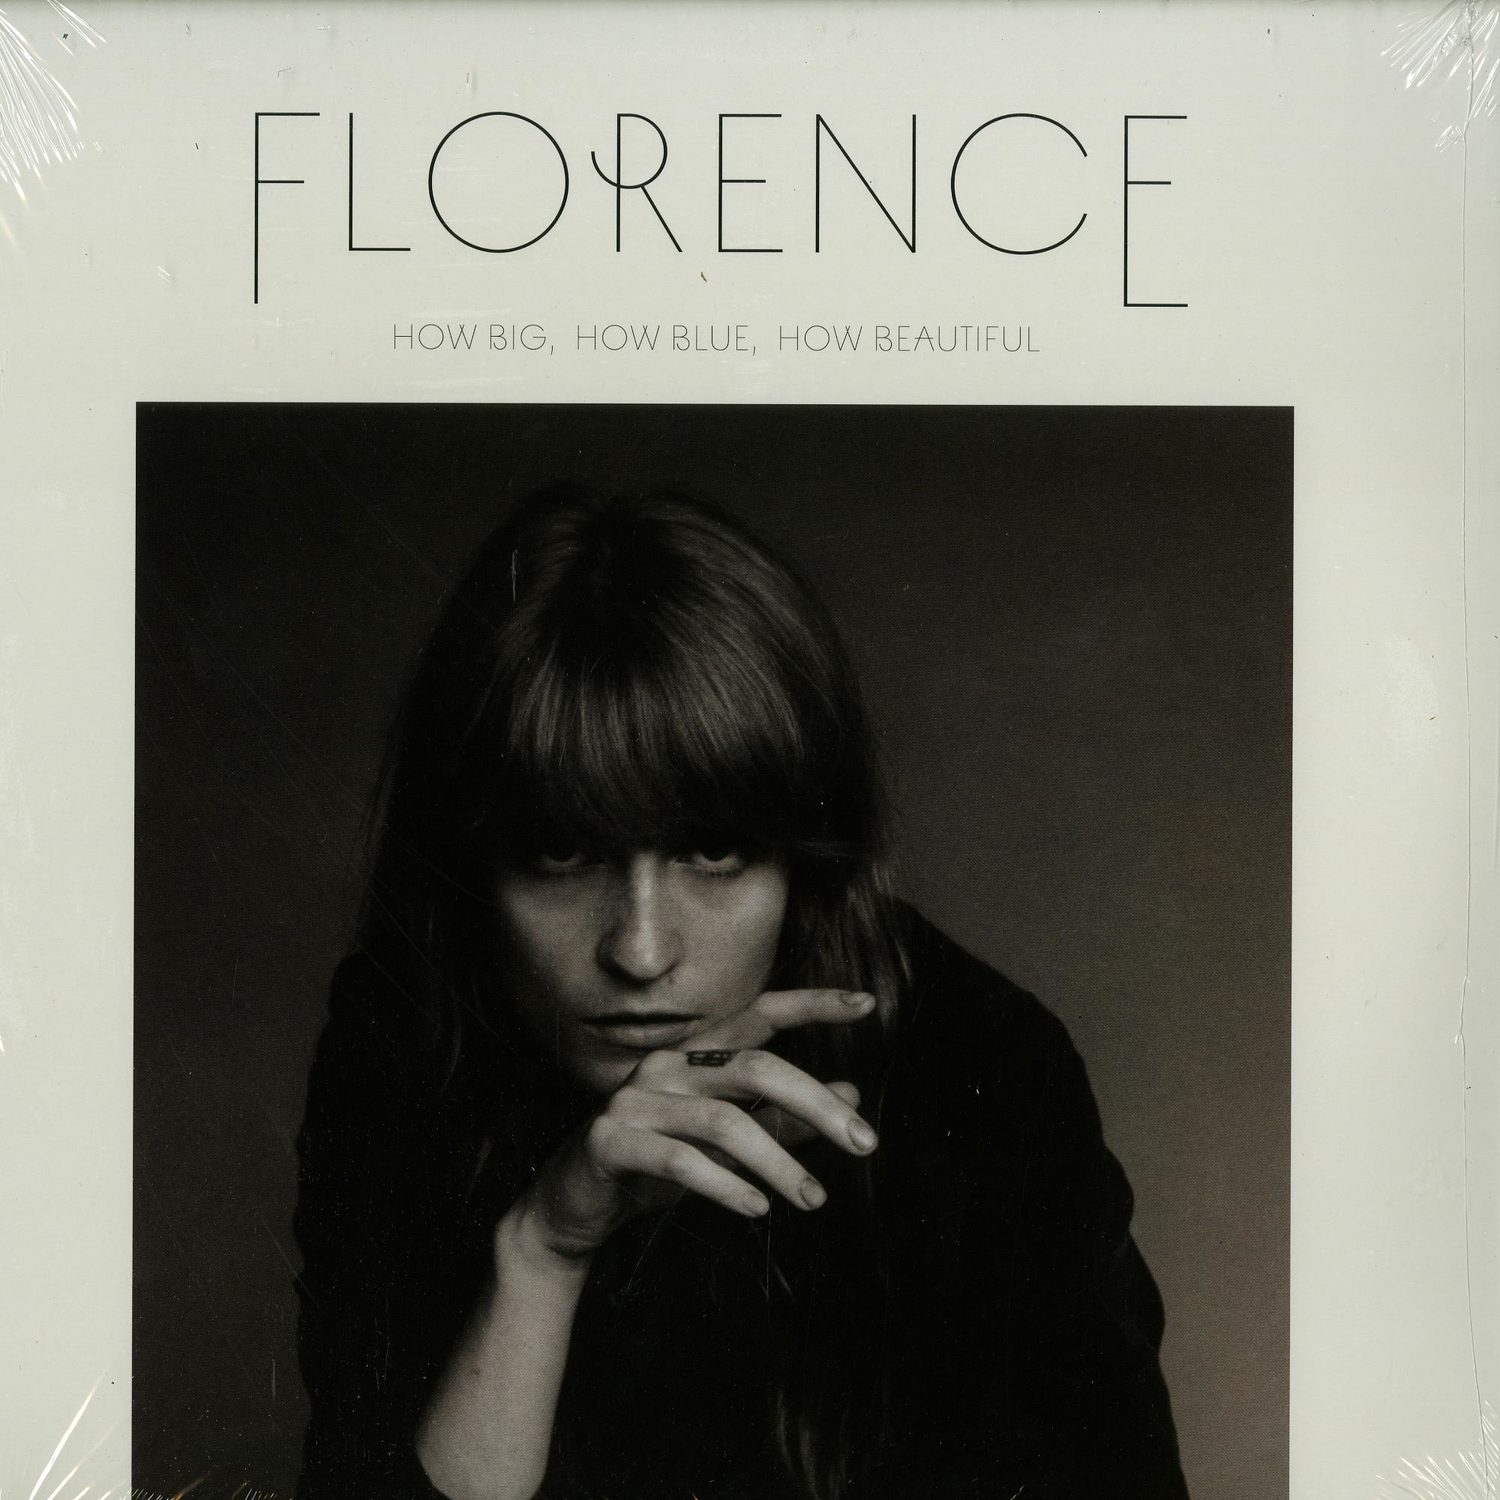 Florence & The Machine - HOW BIG, HOW BLUE, HOW BEAUTIFUL 